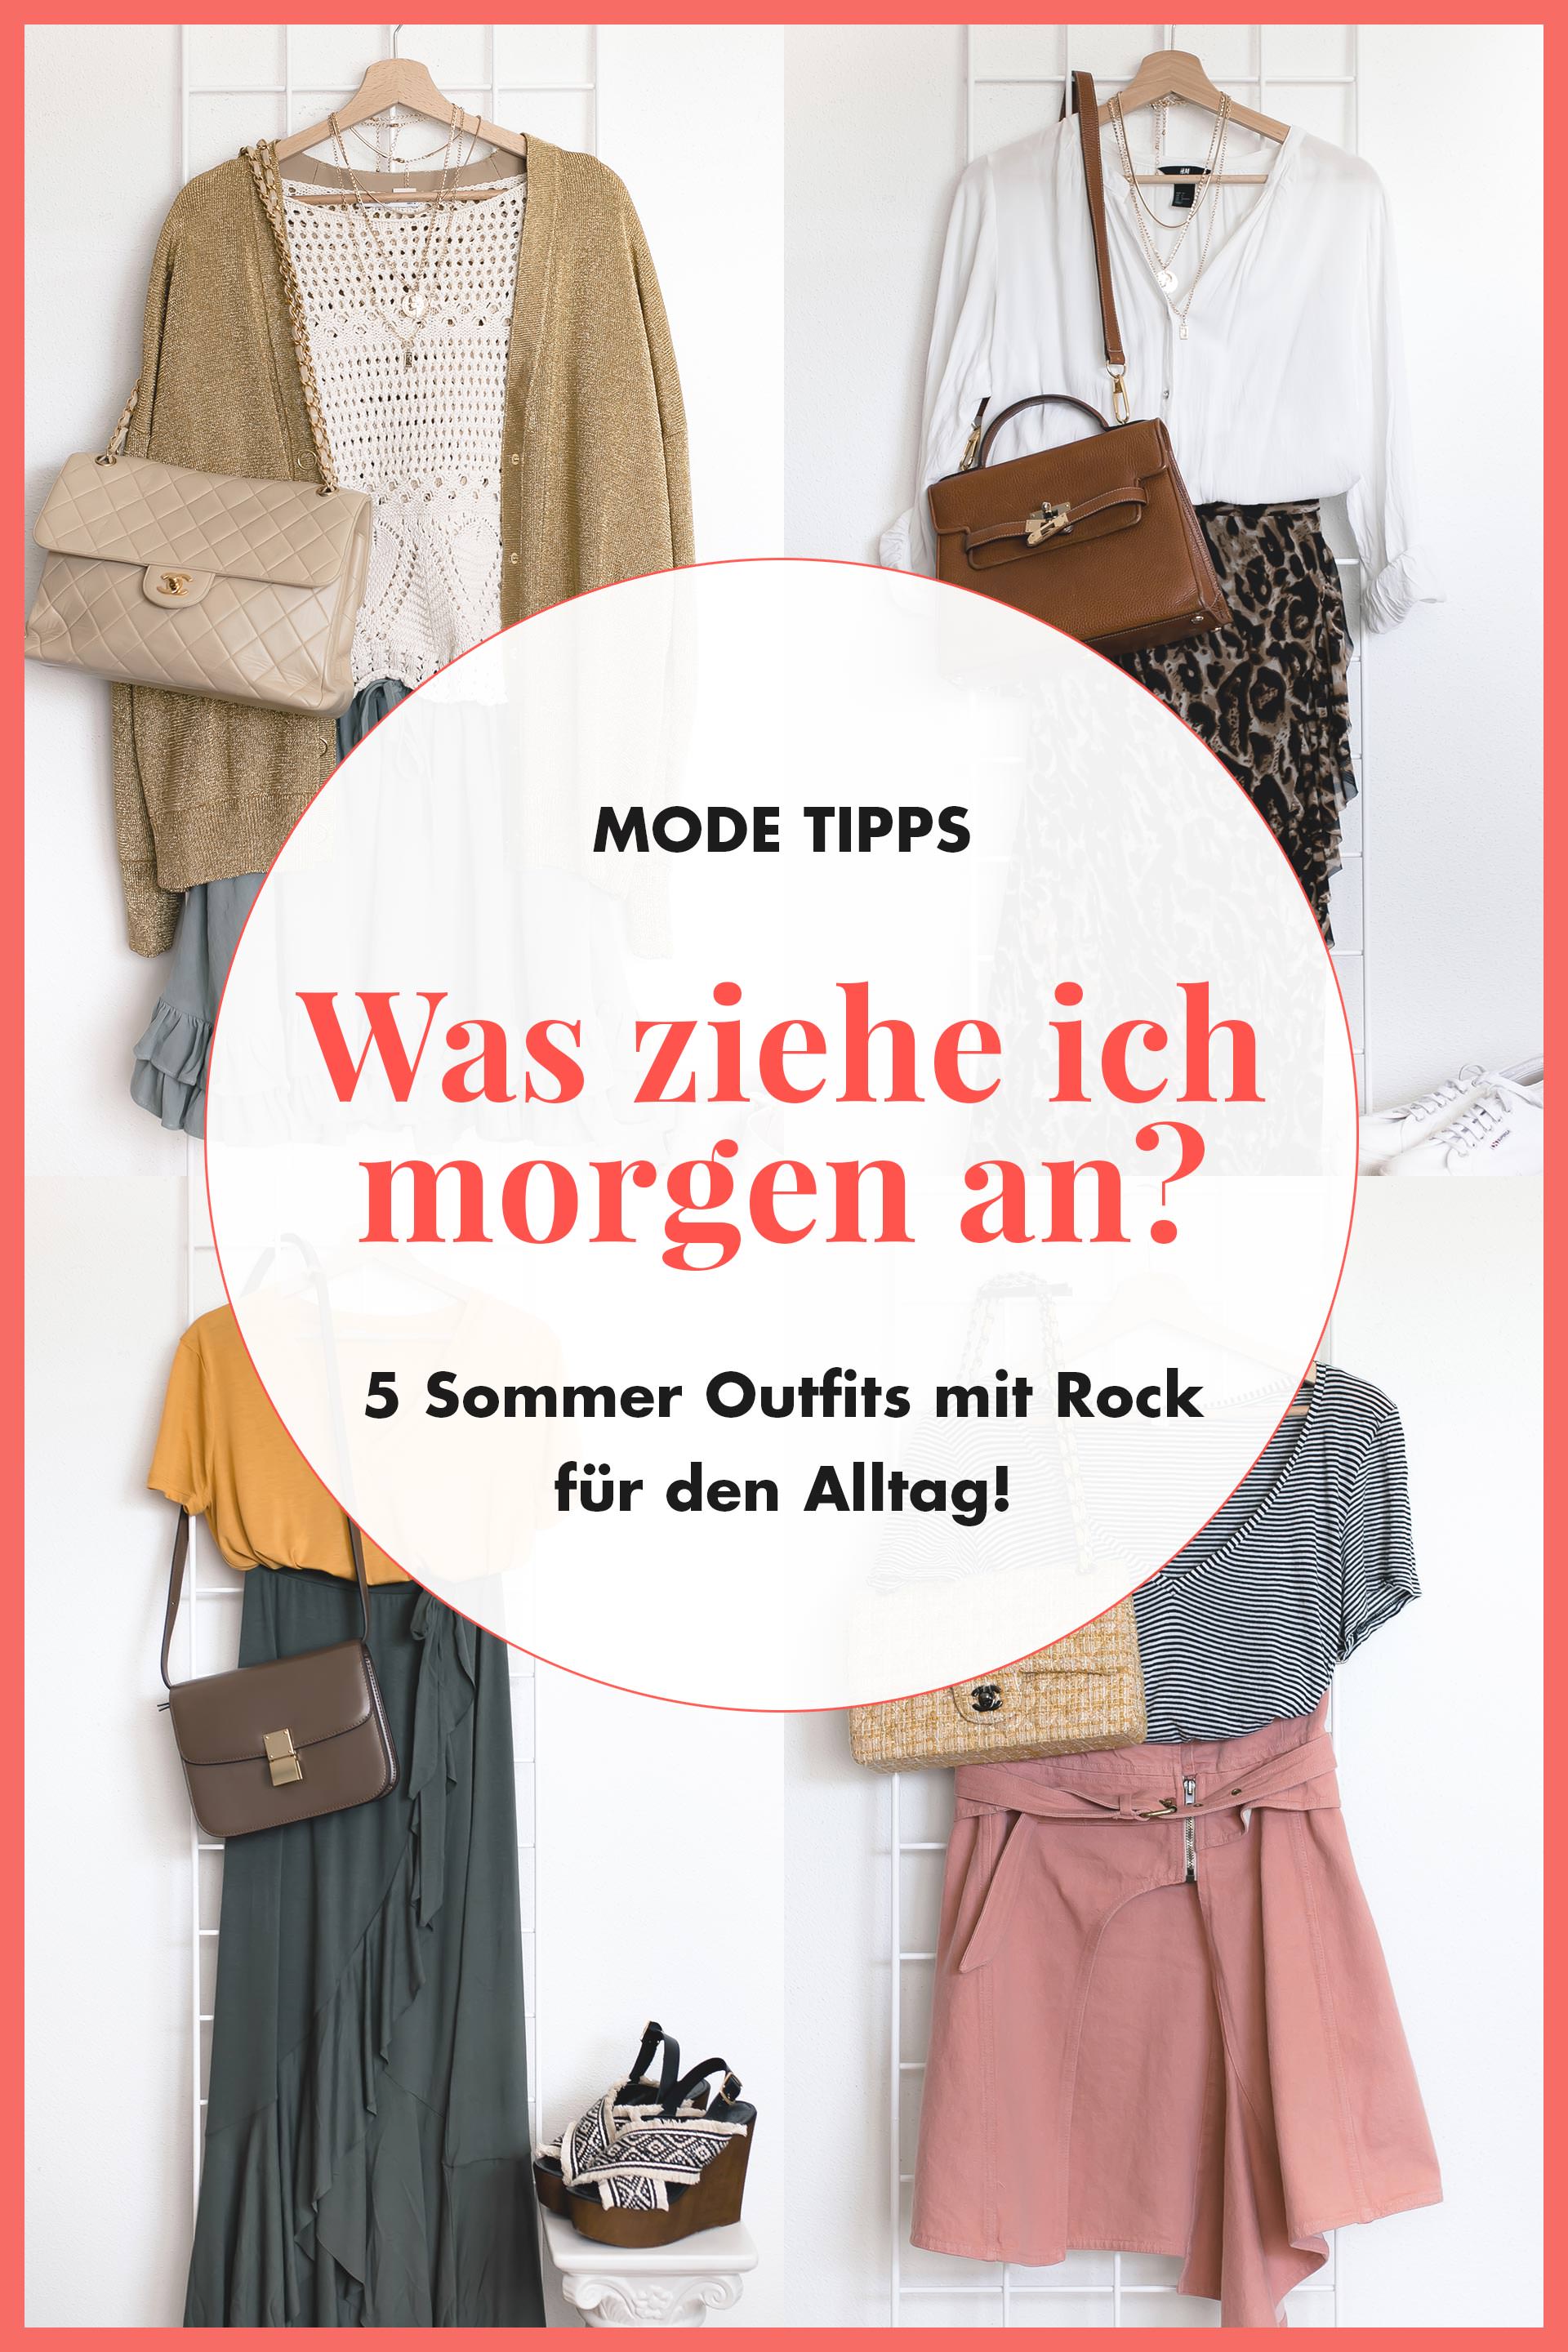 Was ziehe ich morgen an? 5 Sommer Outfits mit Rock!, Who is Mocca?